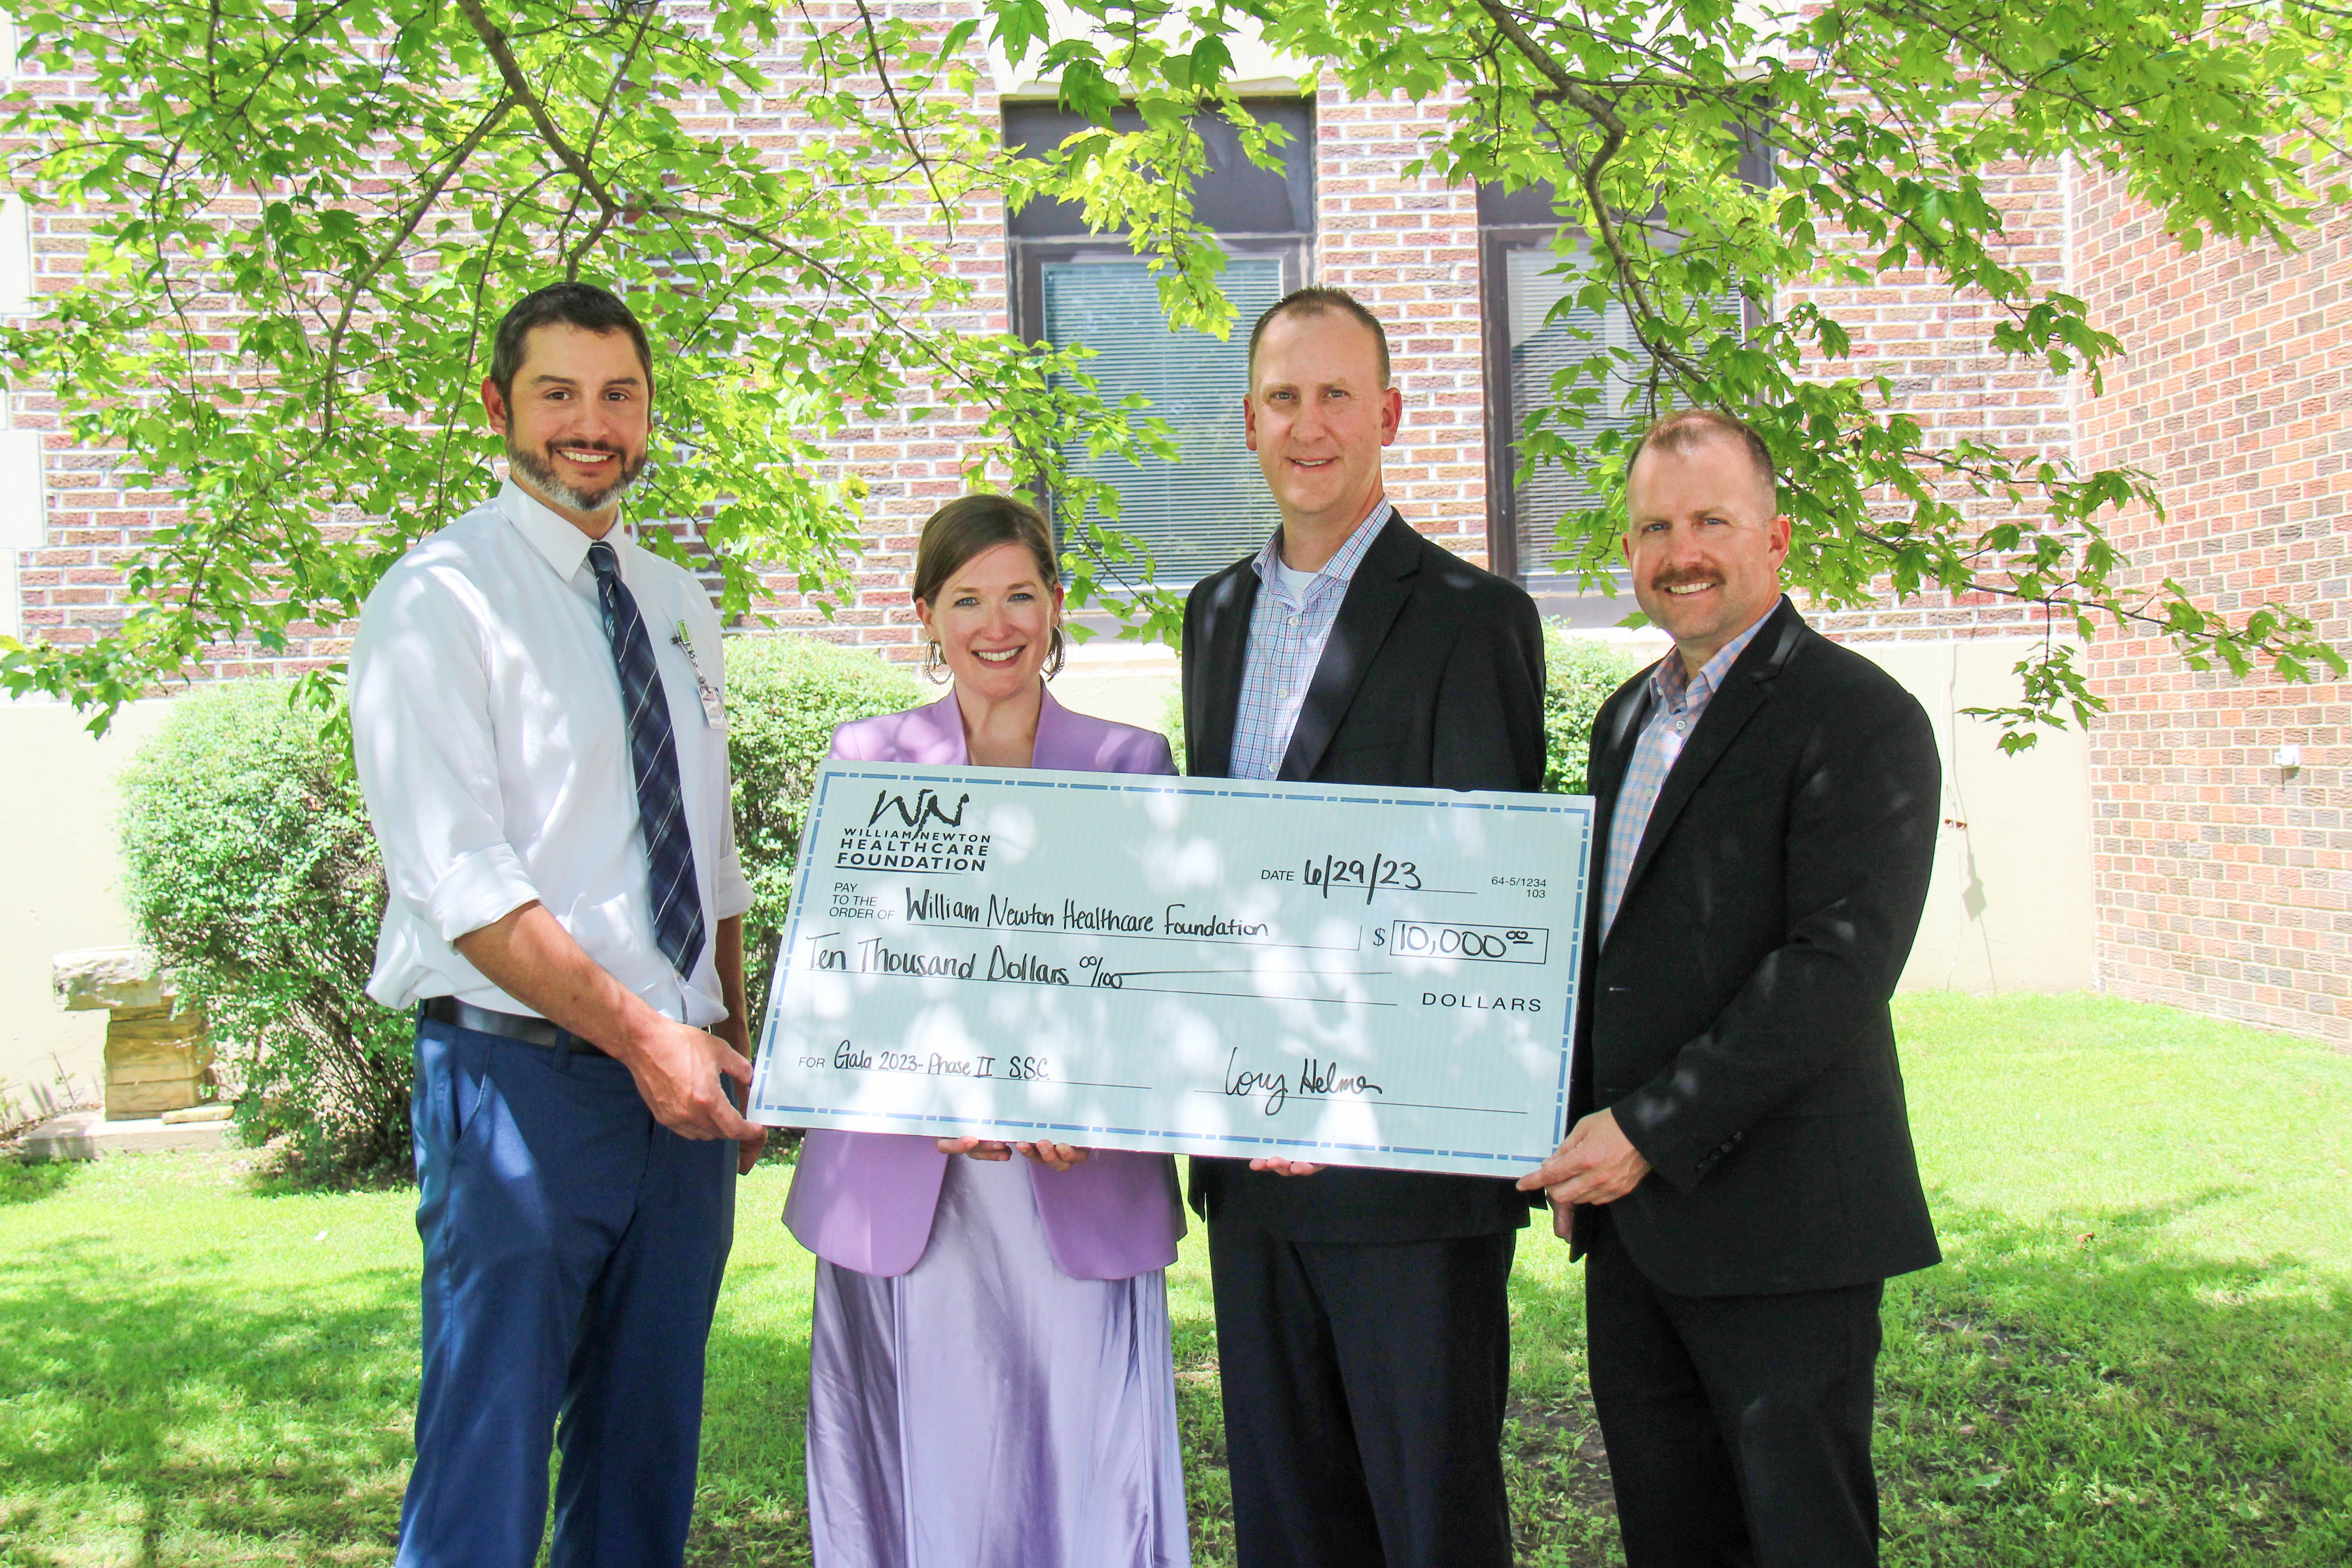 Union State Bank presents a check for the renewal of its annual sponsorship benefiting William Newton Healthcare Foundation. From left: William Newton Hospital Chief Executive Officer Brian Barta, William Newton Healthcare Foundation Executive Director Annika Morris, Union State Bank Winfield Market President Cory Helmer, and Union State Bank Vice President/Mortgage Lender Rusty Zimmerman.